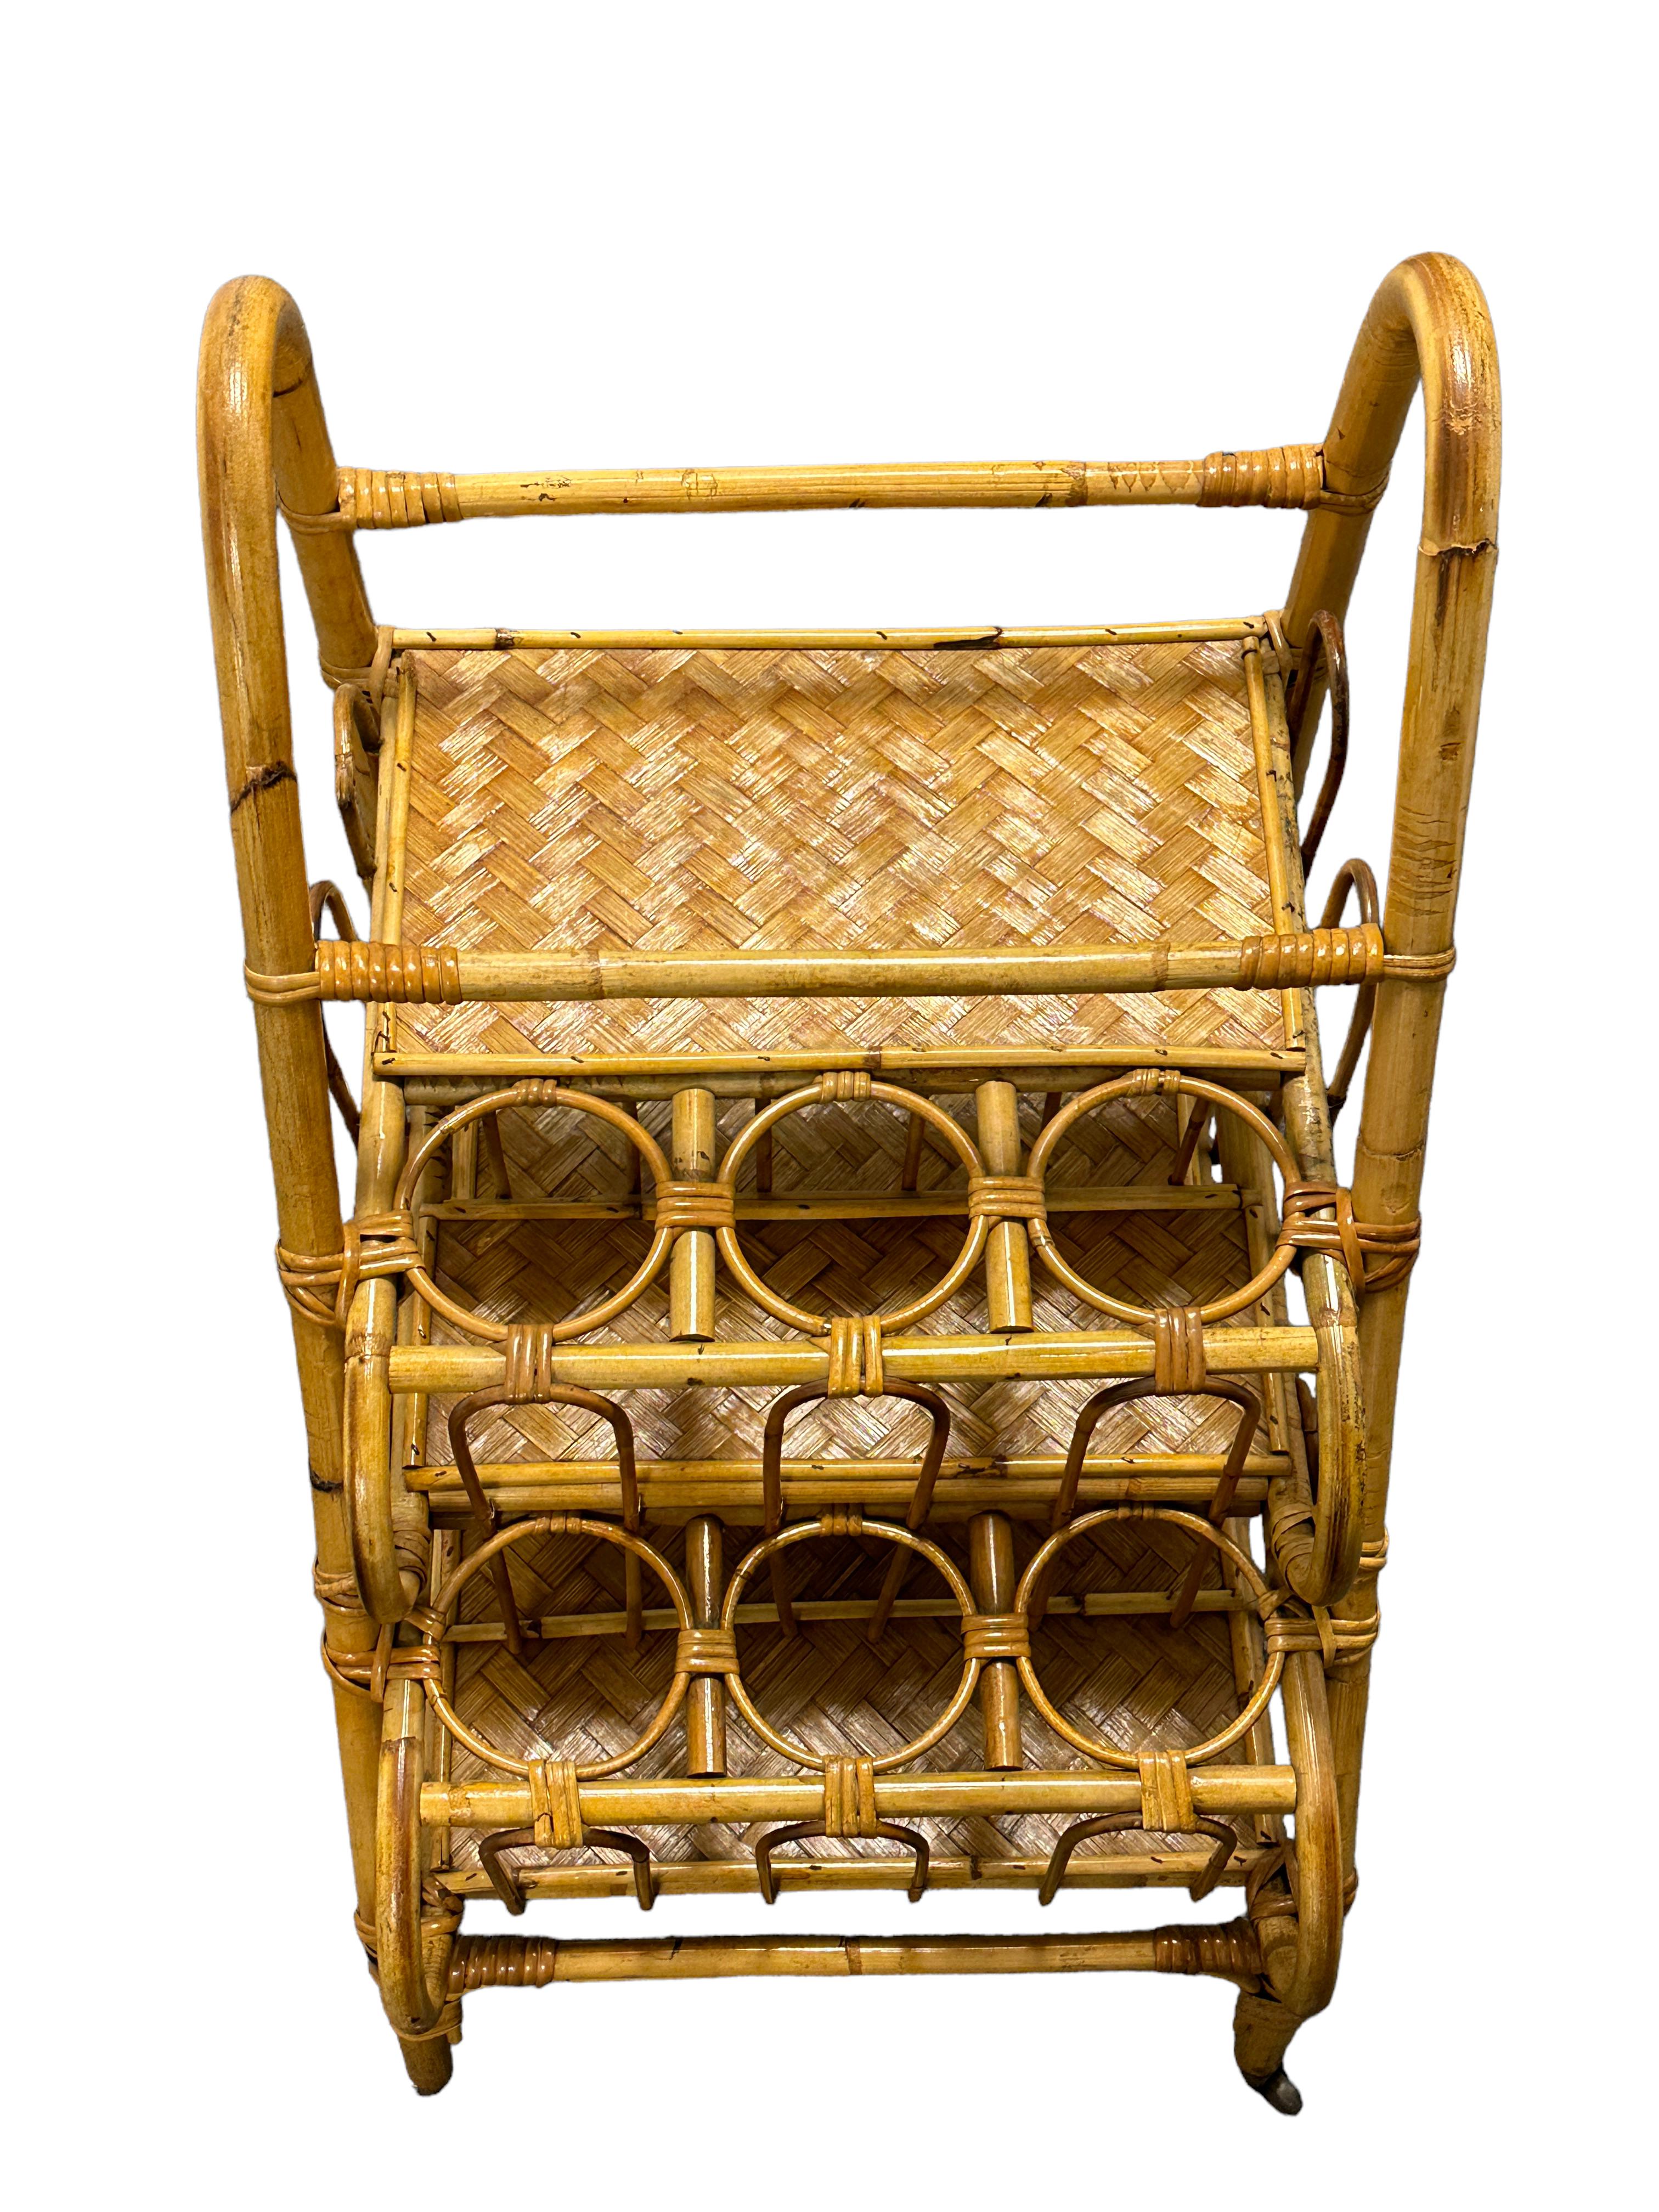 Vivai del Sud Bamboo Wicker Bar Cart Drinks Vine Bottle Stand, Vintage Italy For Sale 1